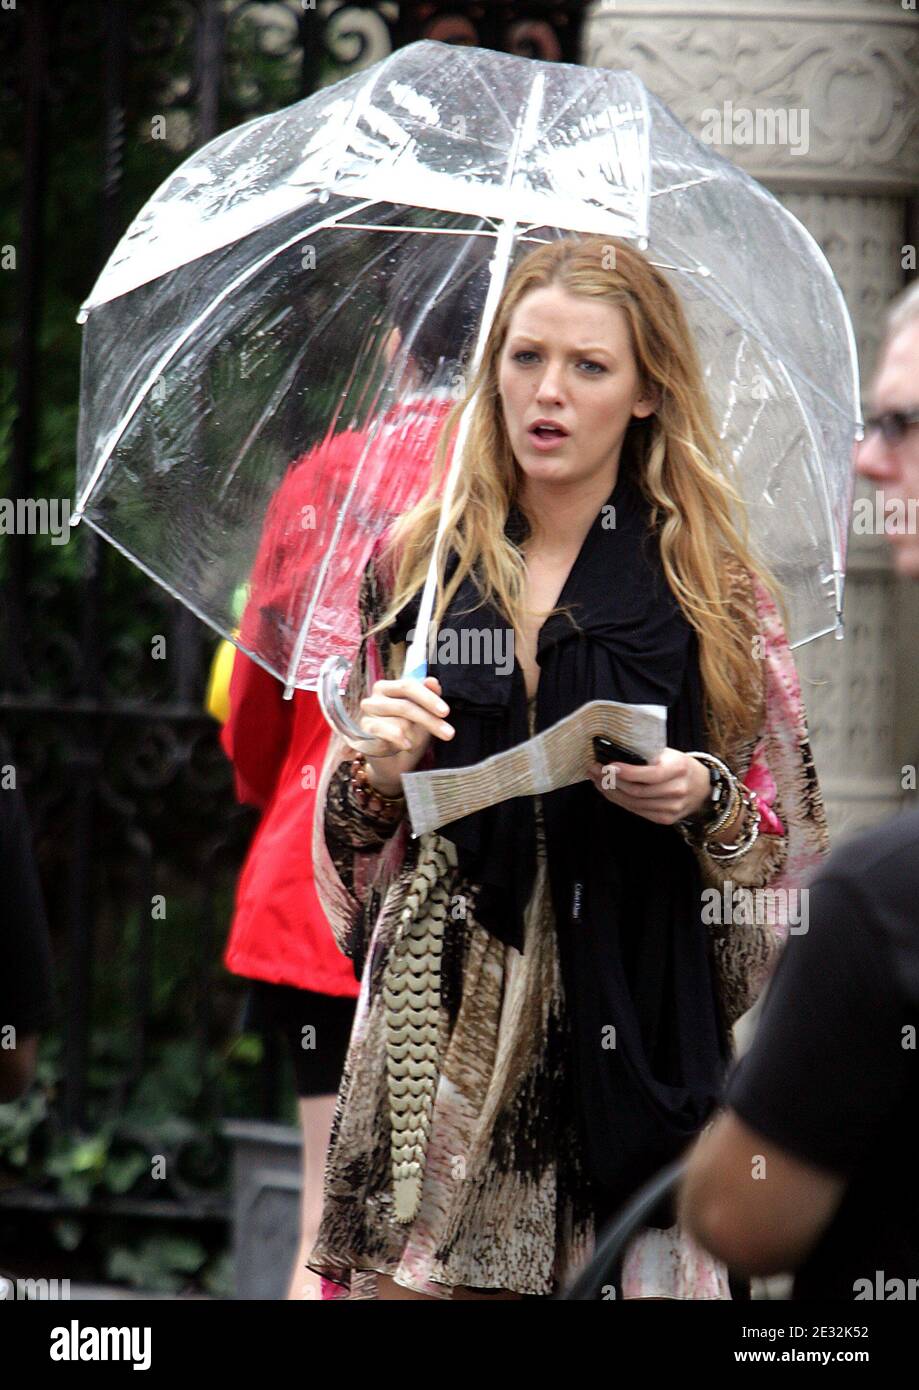 'U.S actors Blake Lively, Leighton Meester, Chace Crawford and Katie Cassidy are filming a new episode of the TV series ''Gossip Girl'' season 4 in The Upper West Side in New York, NY on July 14, 2010. Photo by Charles Guerin/ABACAPRESS.COM' Stock Photo